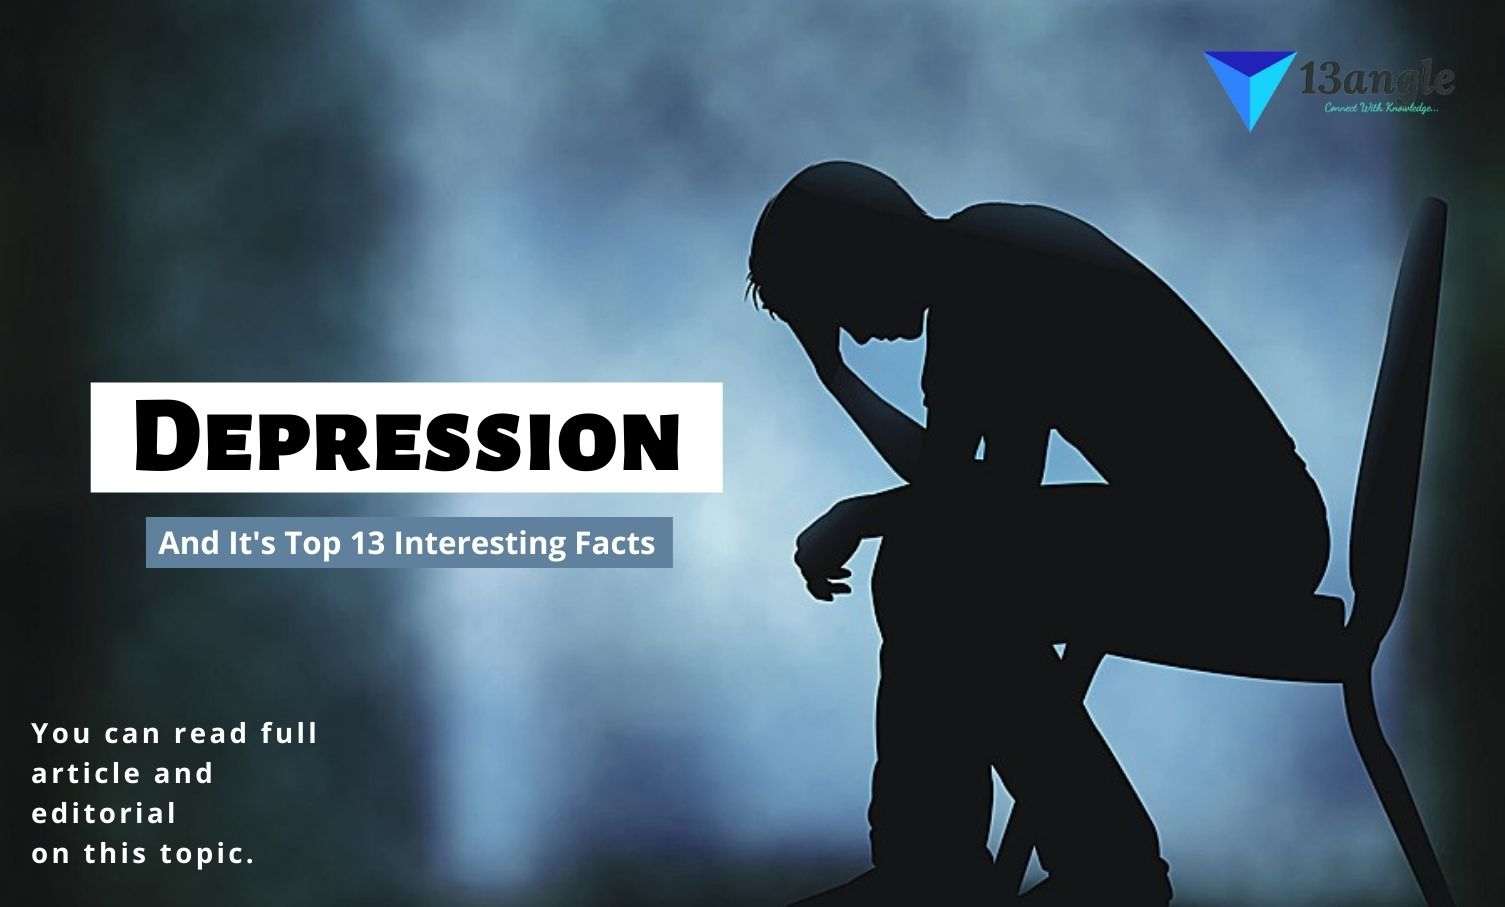 Depression And It's Top 13 Interesting Facts- 13angle.com